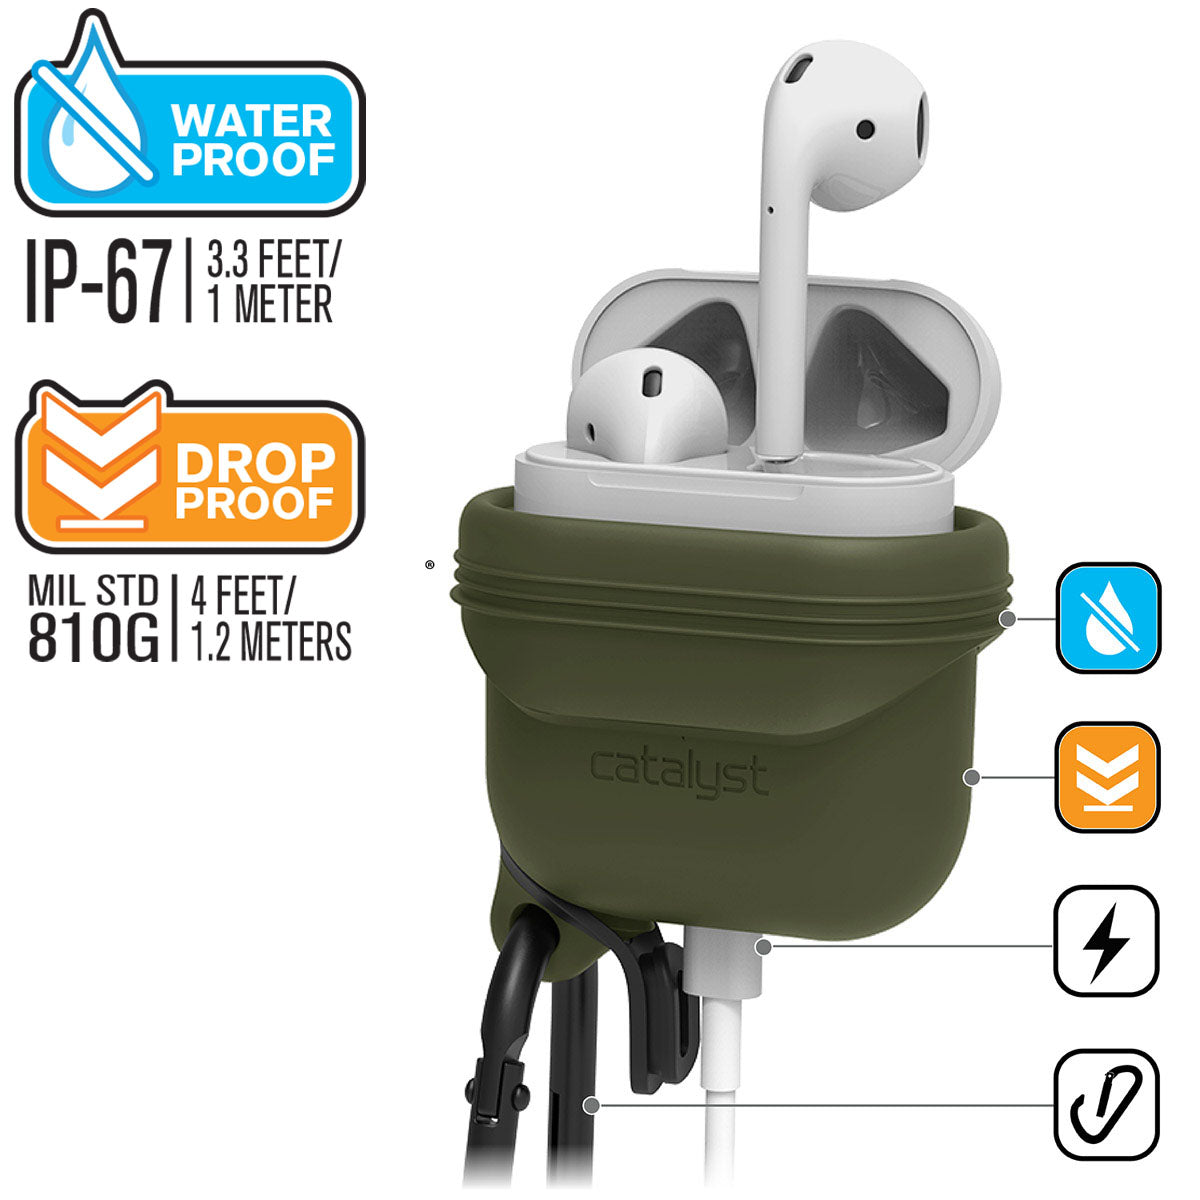 Catalyst airpods gen2/1 waterproof case + carabiner showing the case drop proof and water proof features in army green text reads water proof IP-67 3.3 FEET/1 METER DROP PROOF MIL STD 810G 1.2 METERS 